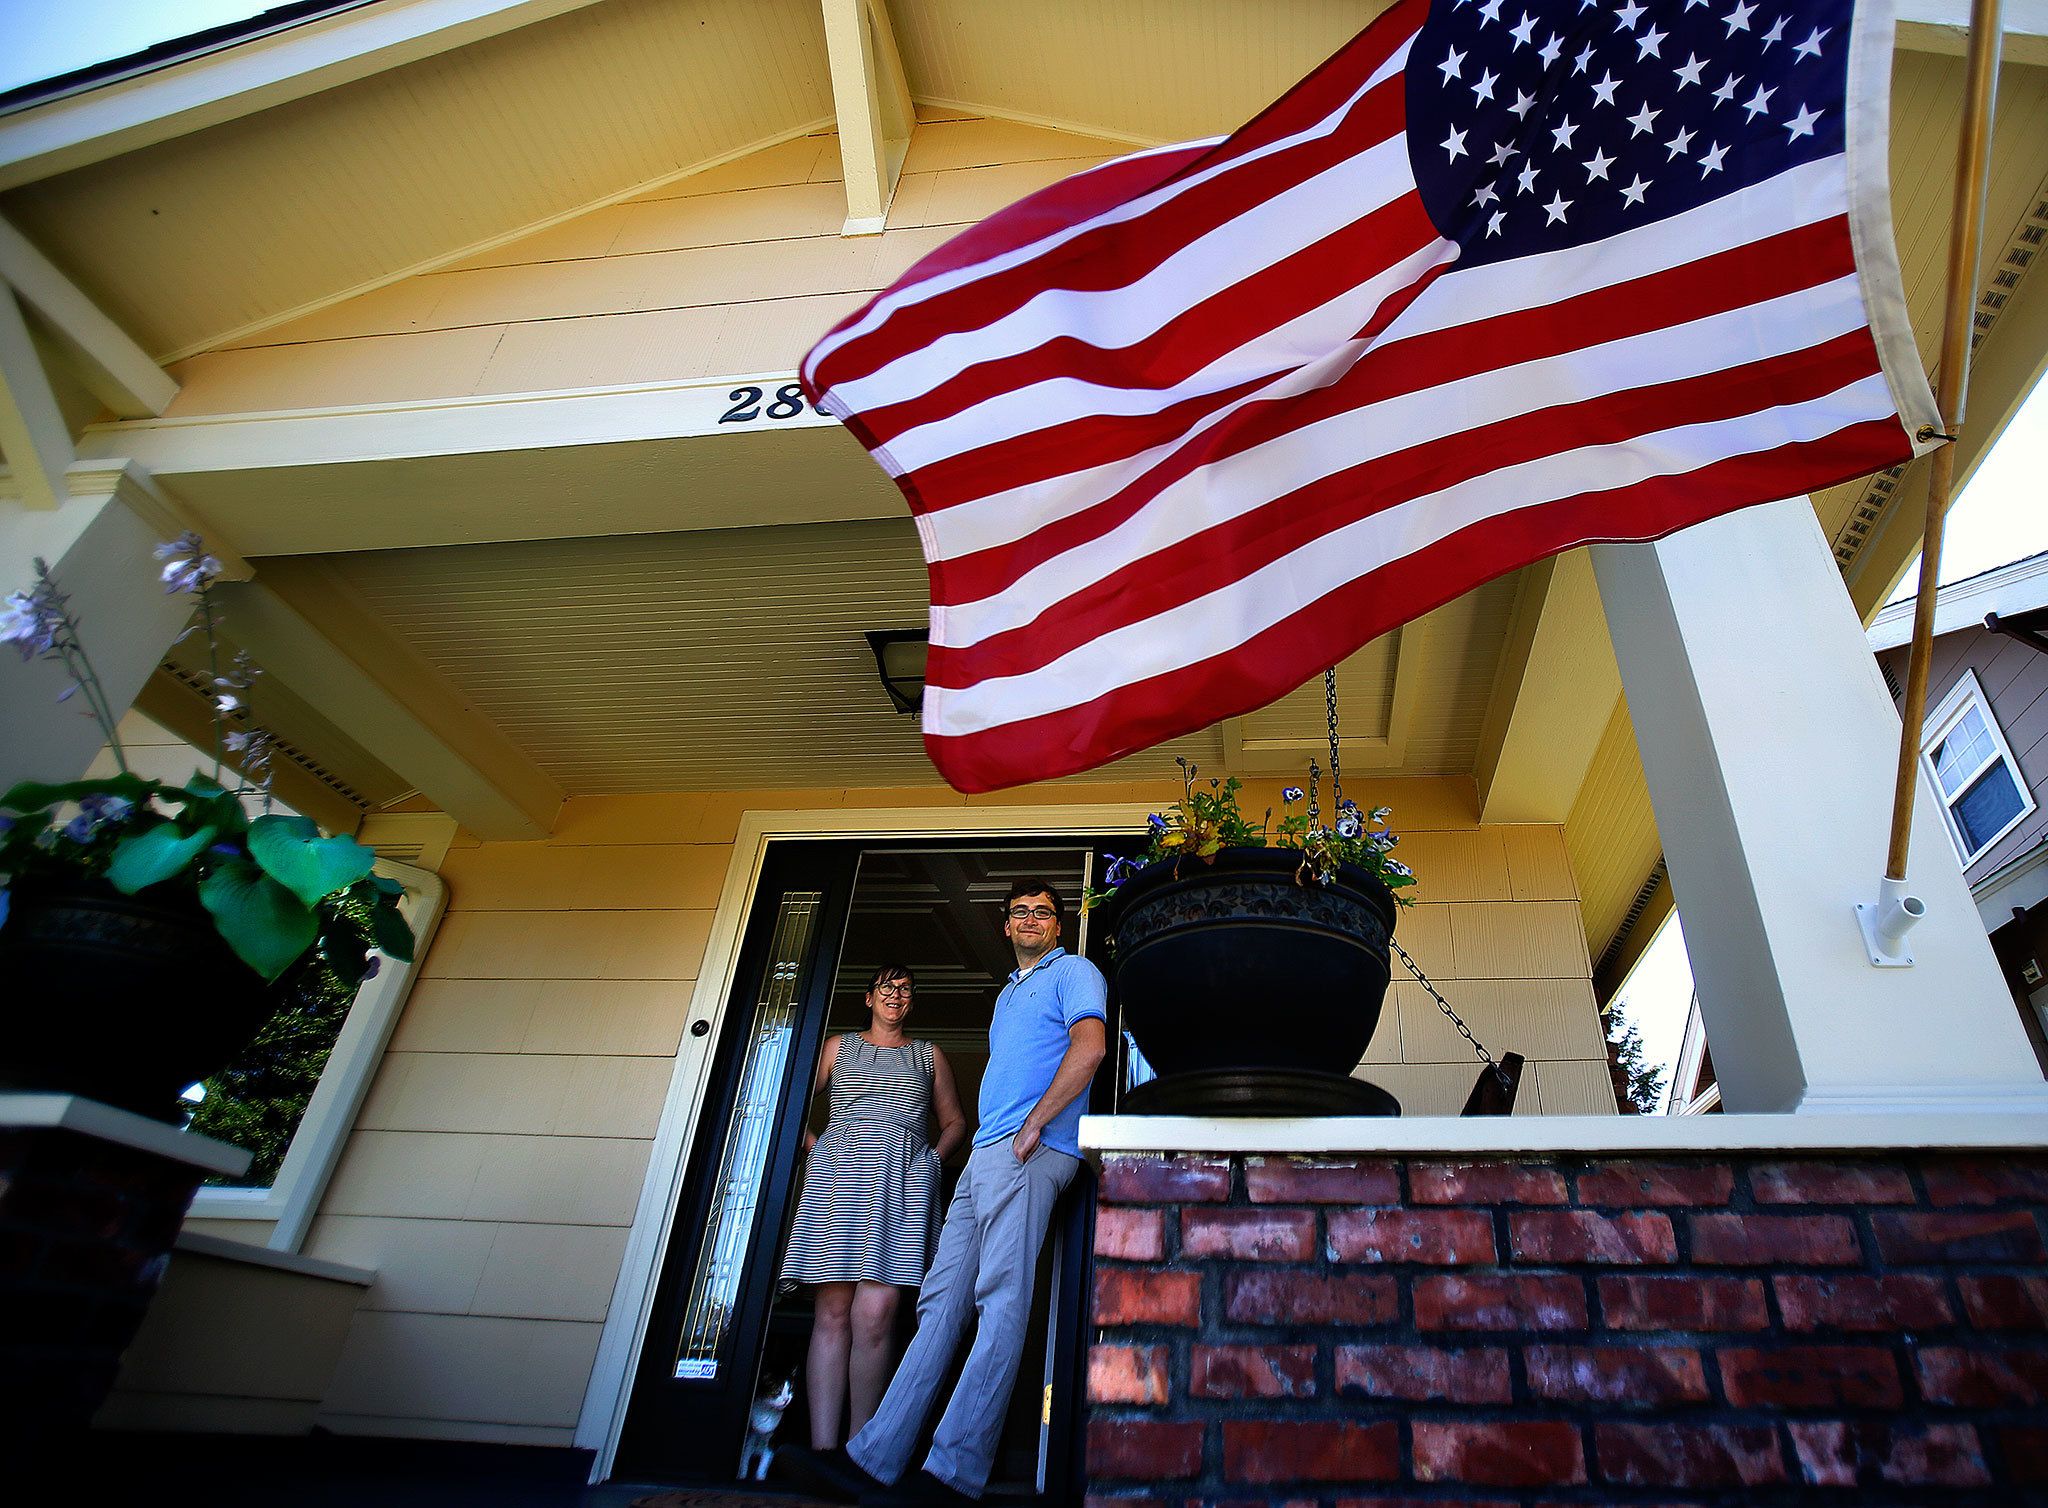 Matt and Kristen Keenan have done some serious work on their house in north Everett. (Dan Bates / The Herald)